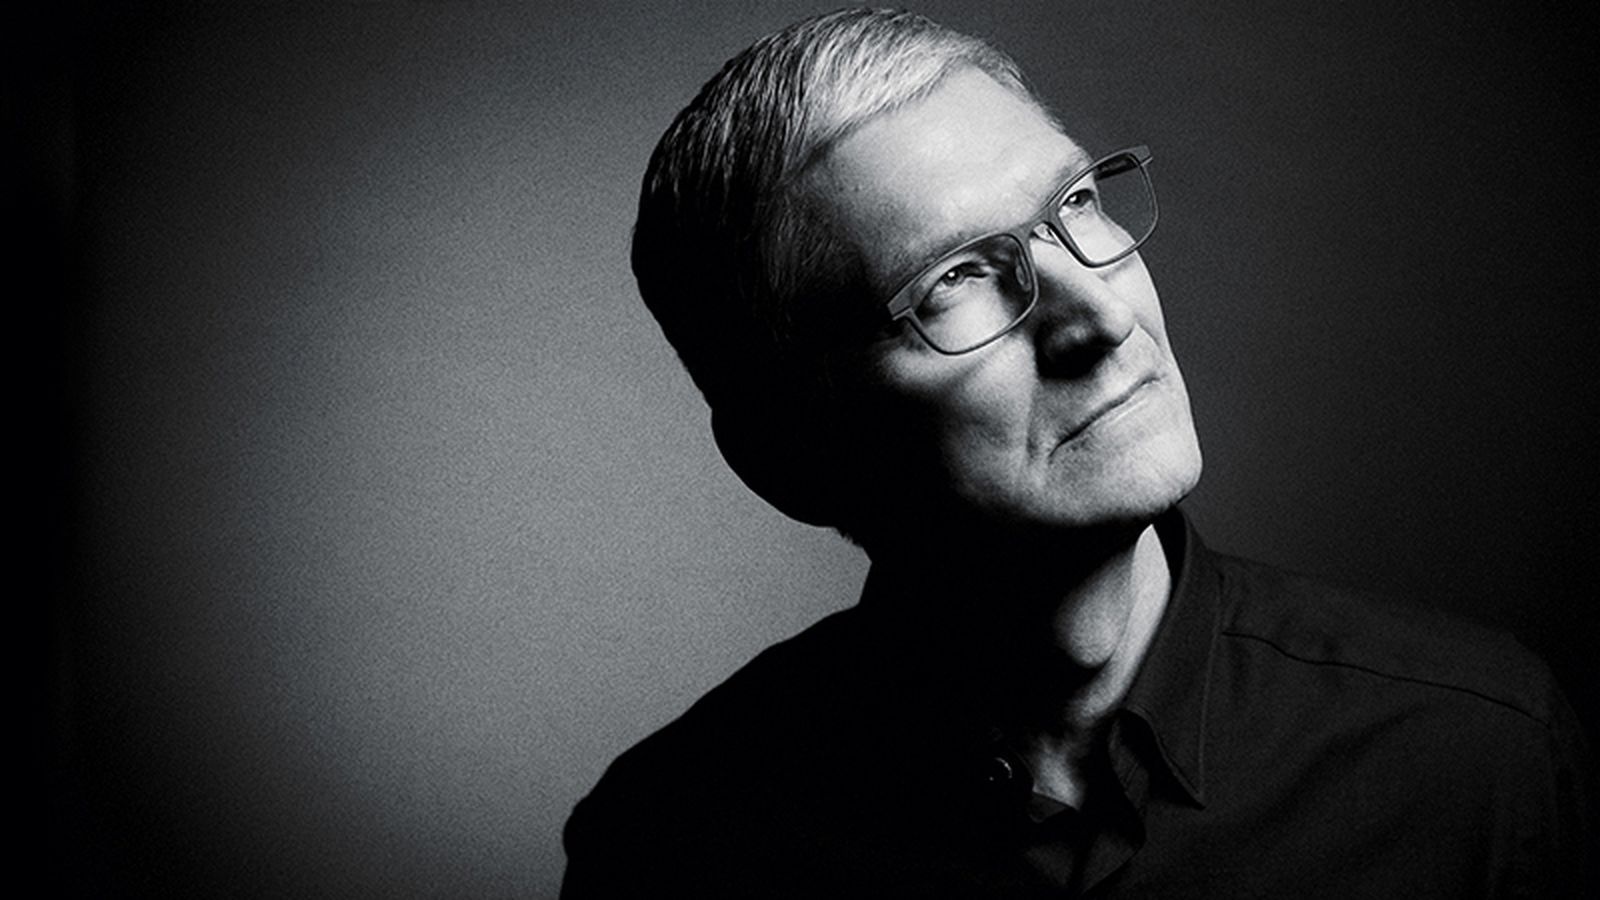 Tim Cook Says Apple is Always Focused on 'Products and People